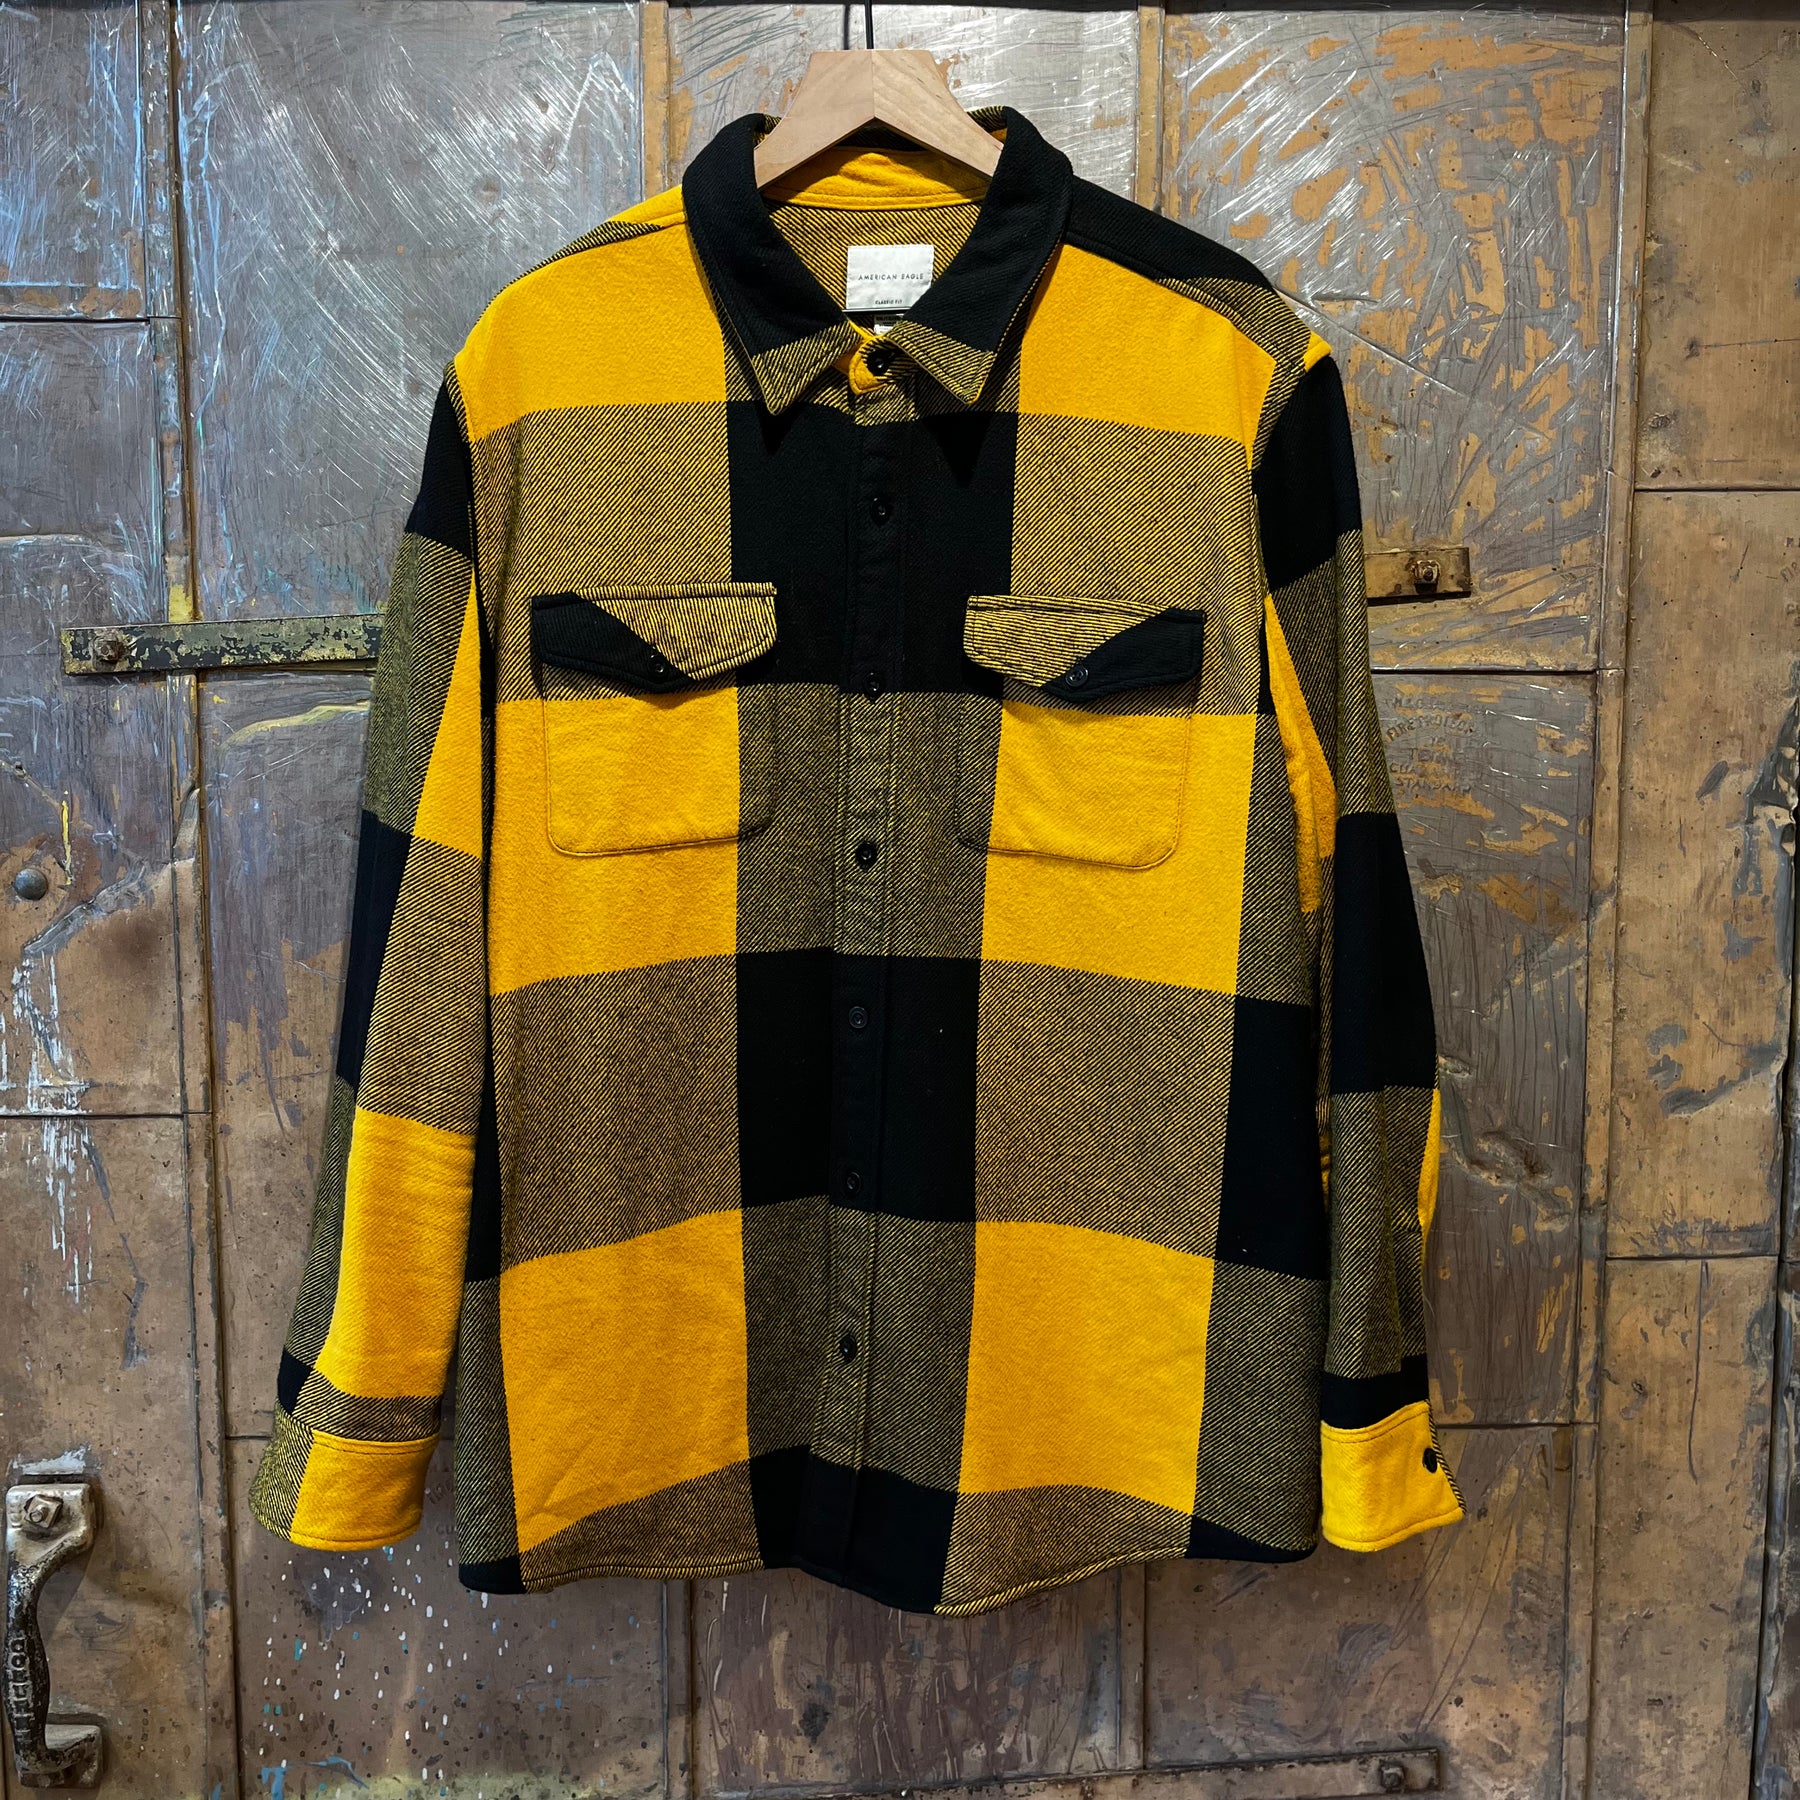 Yellow and Black Flannel